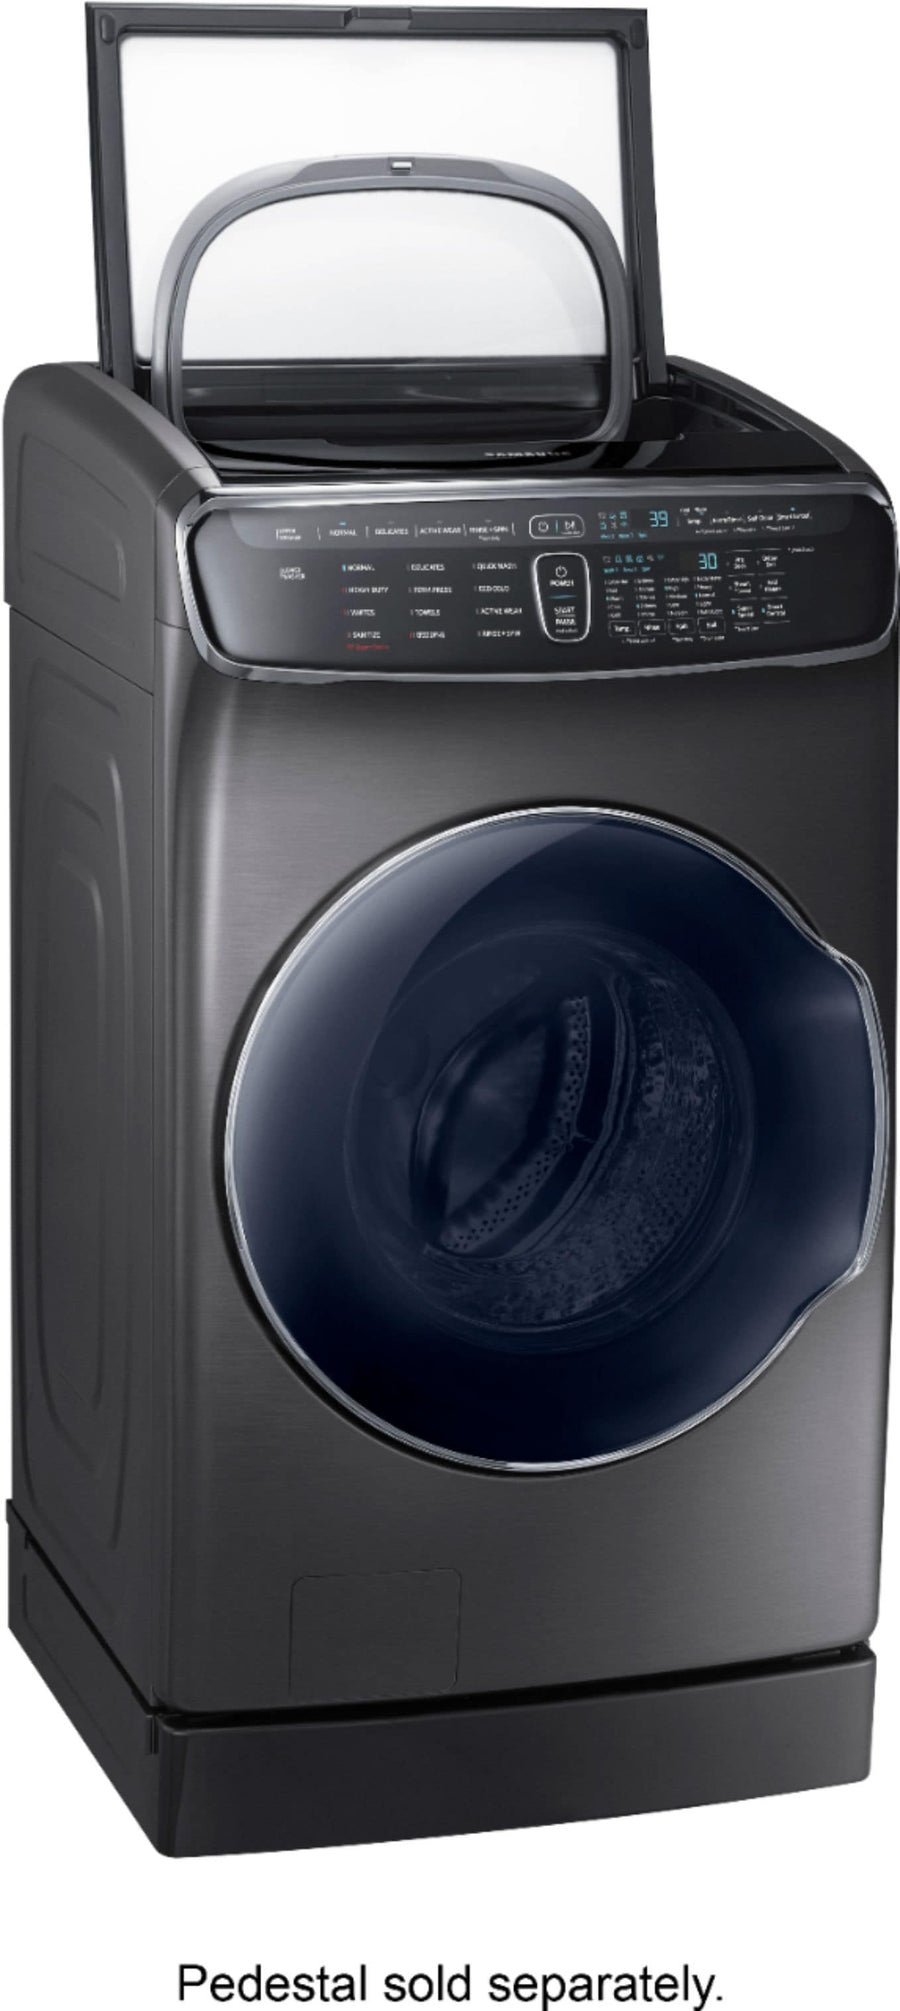 Samsung - 6.0 Cu. Ft. High Efficiency Smart Front Load Washer with Steam and FlexWash - Black stainless steel_1